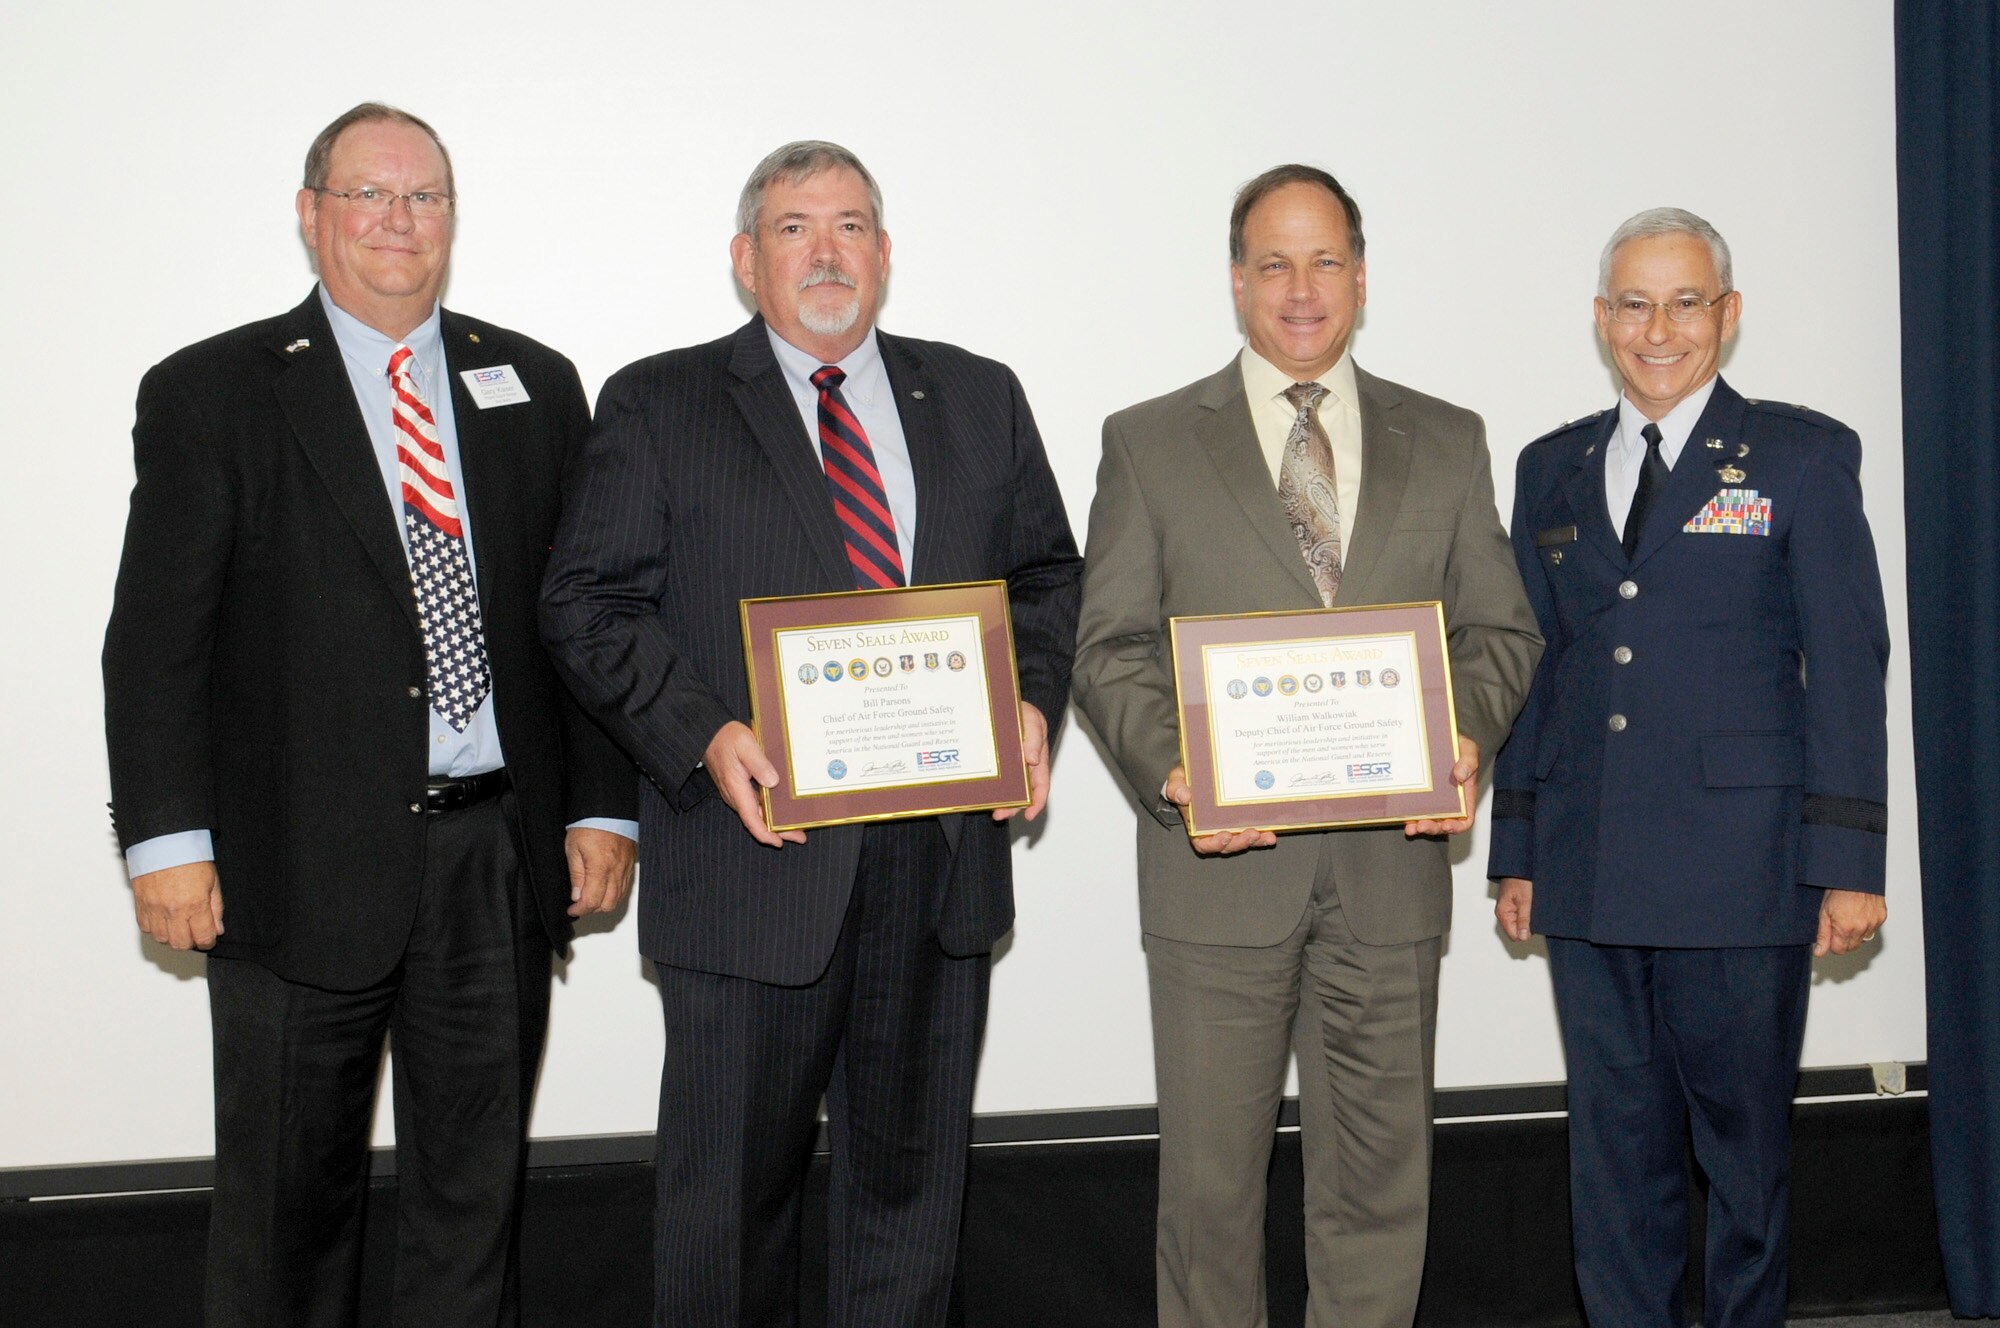 Bill "Top" Parsons,center left, Air Force chief of ground safety, and Bill Walkowiak, center right, Air Force deputy chief of ground safety, received Employer Support of the Guard and Reserve Patriot Awards for outstanding support of their employees who are members of the Air Force Reserve.The awards were presented Oct. 3 at the Air Force Safety Center, Kirtland Air Force Base, N.M. Making the presentations were Gary Kaiser, left, ESGR program support manager, and Brig. Gen. Andrew Salas, right, New Mexico adjutant general. (U.S. Air Force photo/Keith Wright)